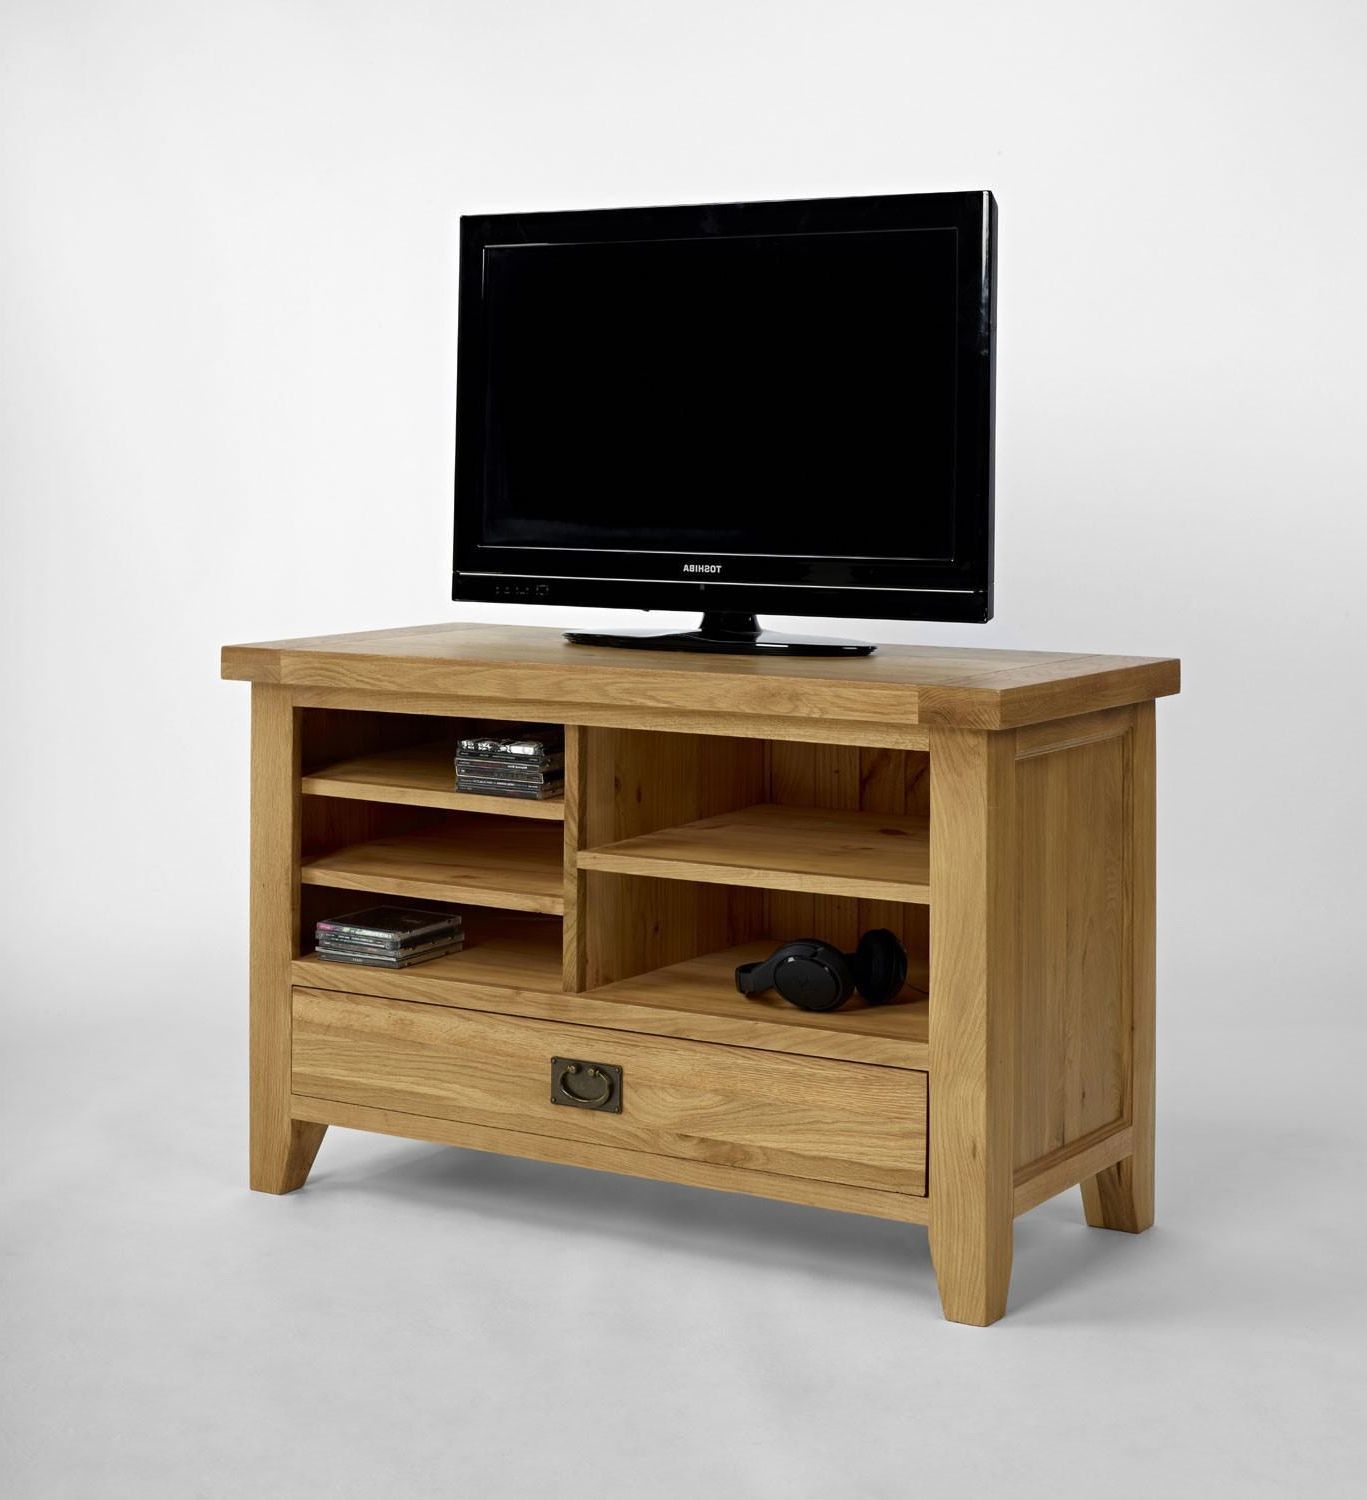 20 Best Small Tv Stands On Wheels